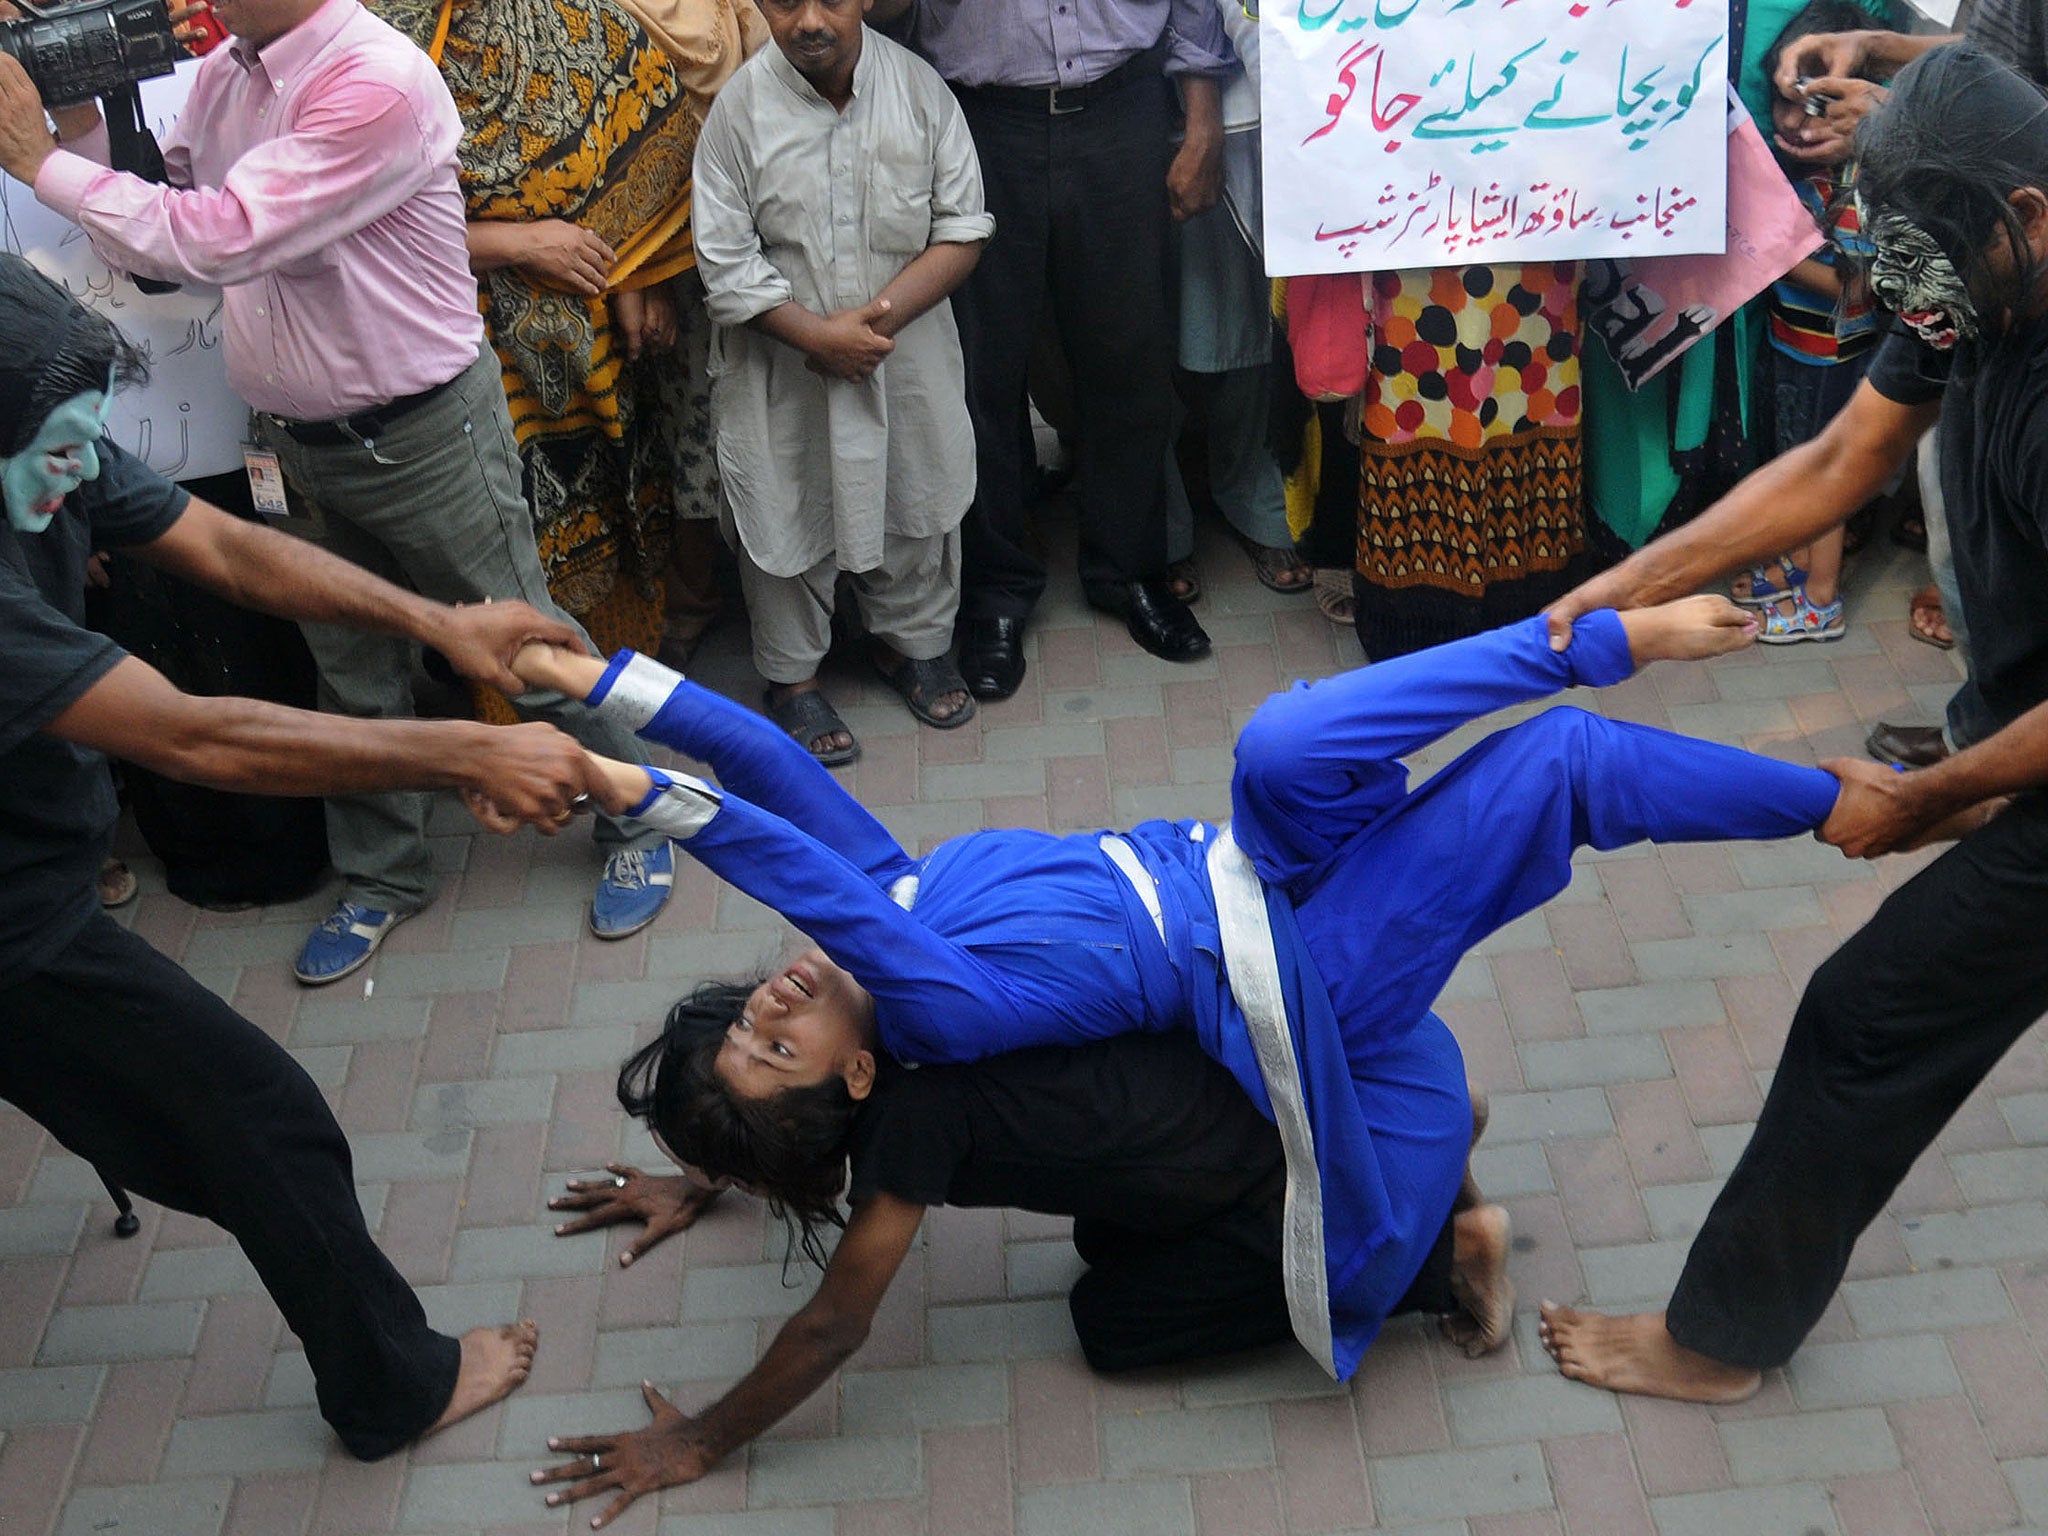 Pakistani workers from NGOs perform during an anti-rape protest in Lahore on 14 September